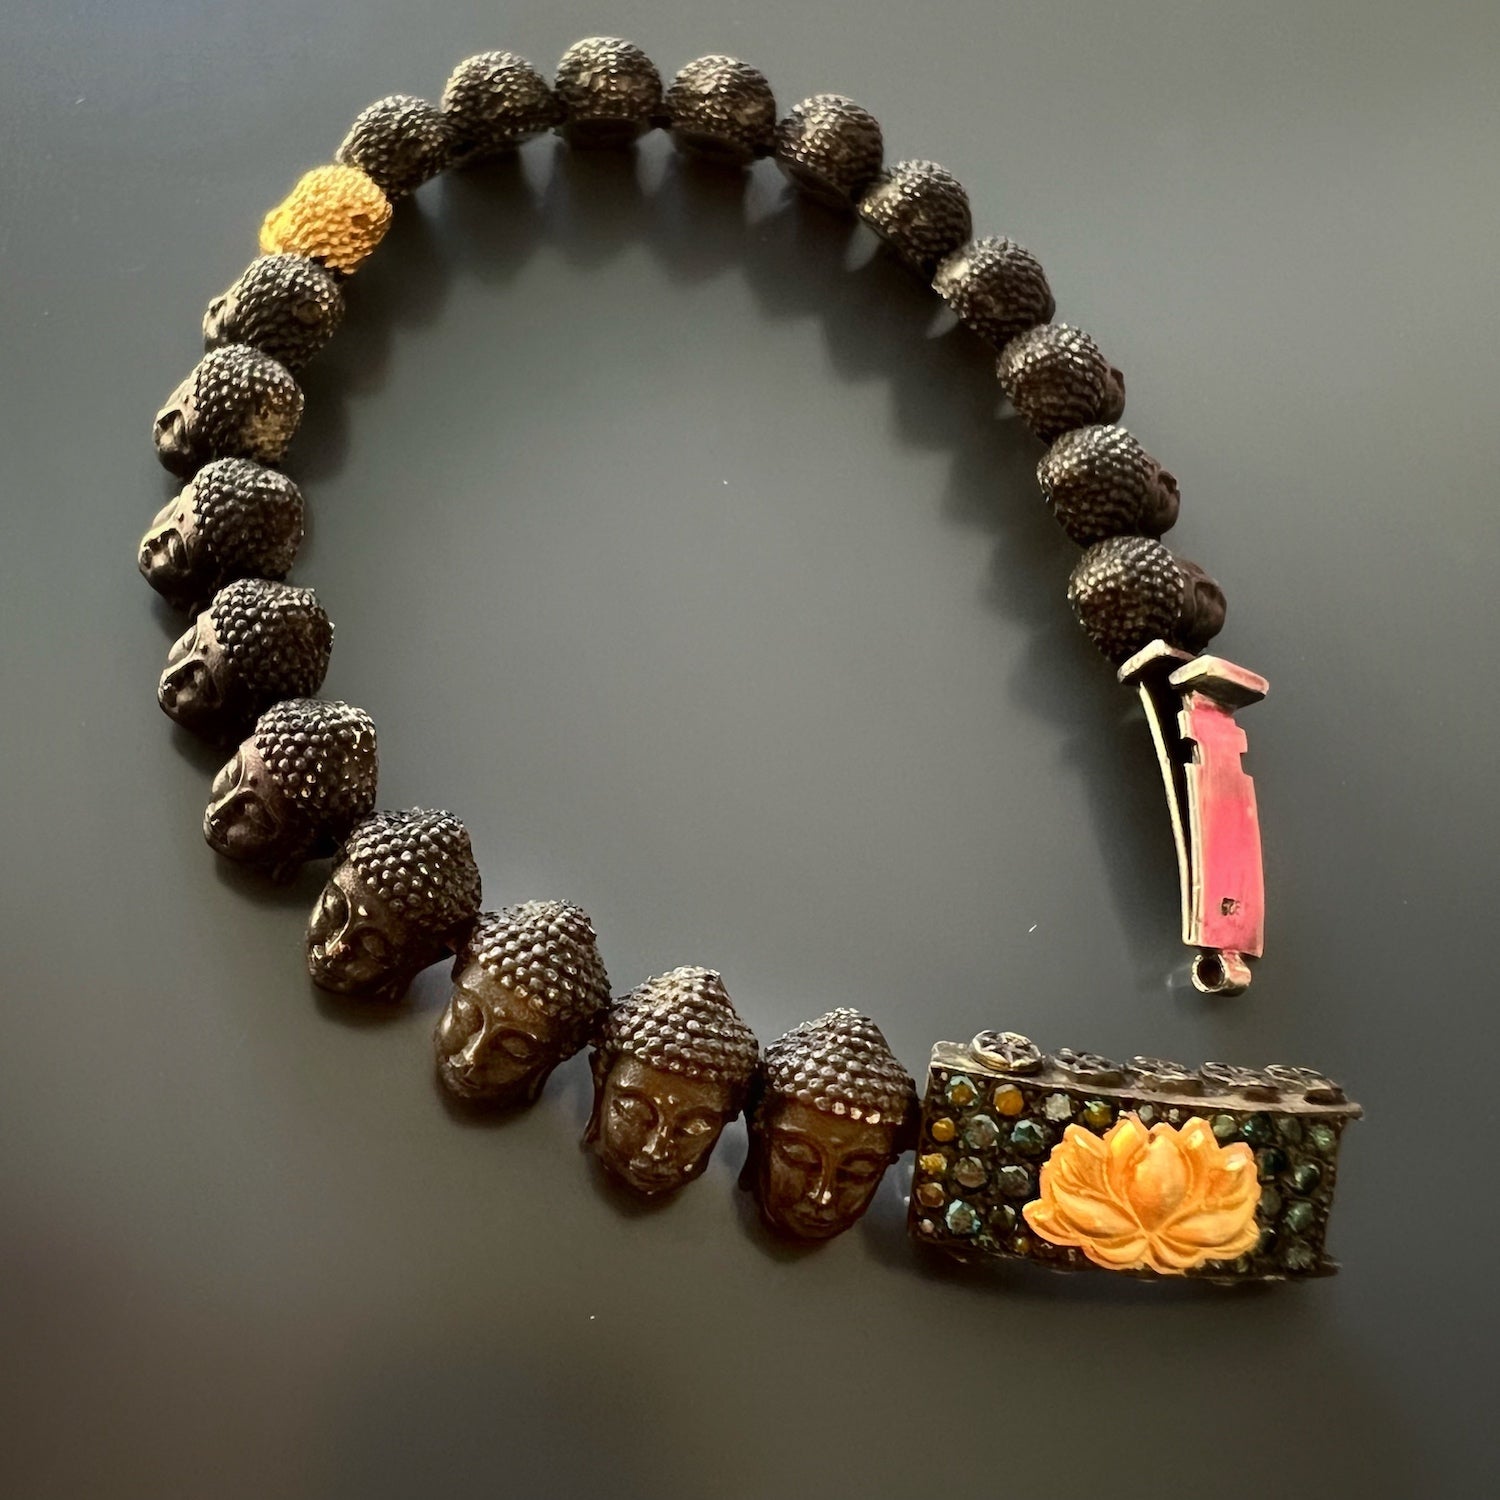 Custom Sizing Available - Contact us to personalize your Gold Lotus Buddha Bracelet.